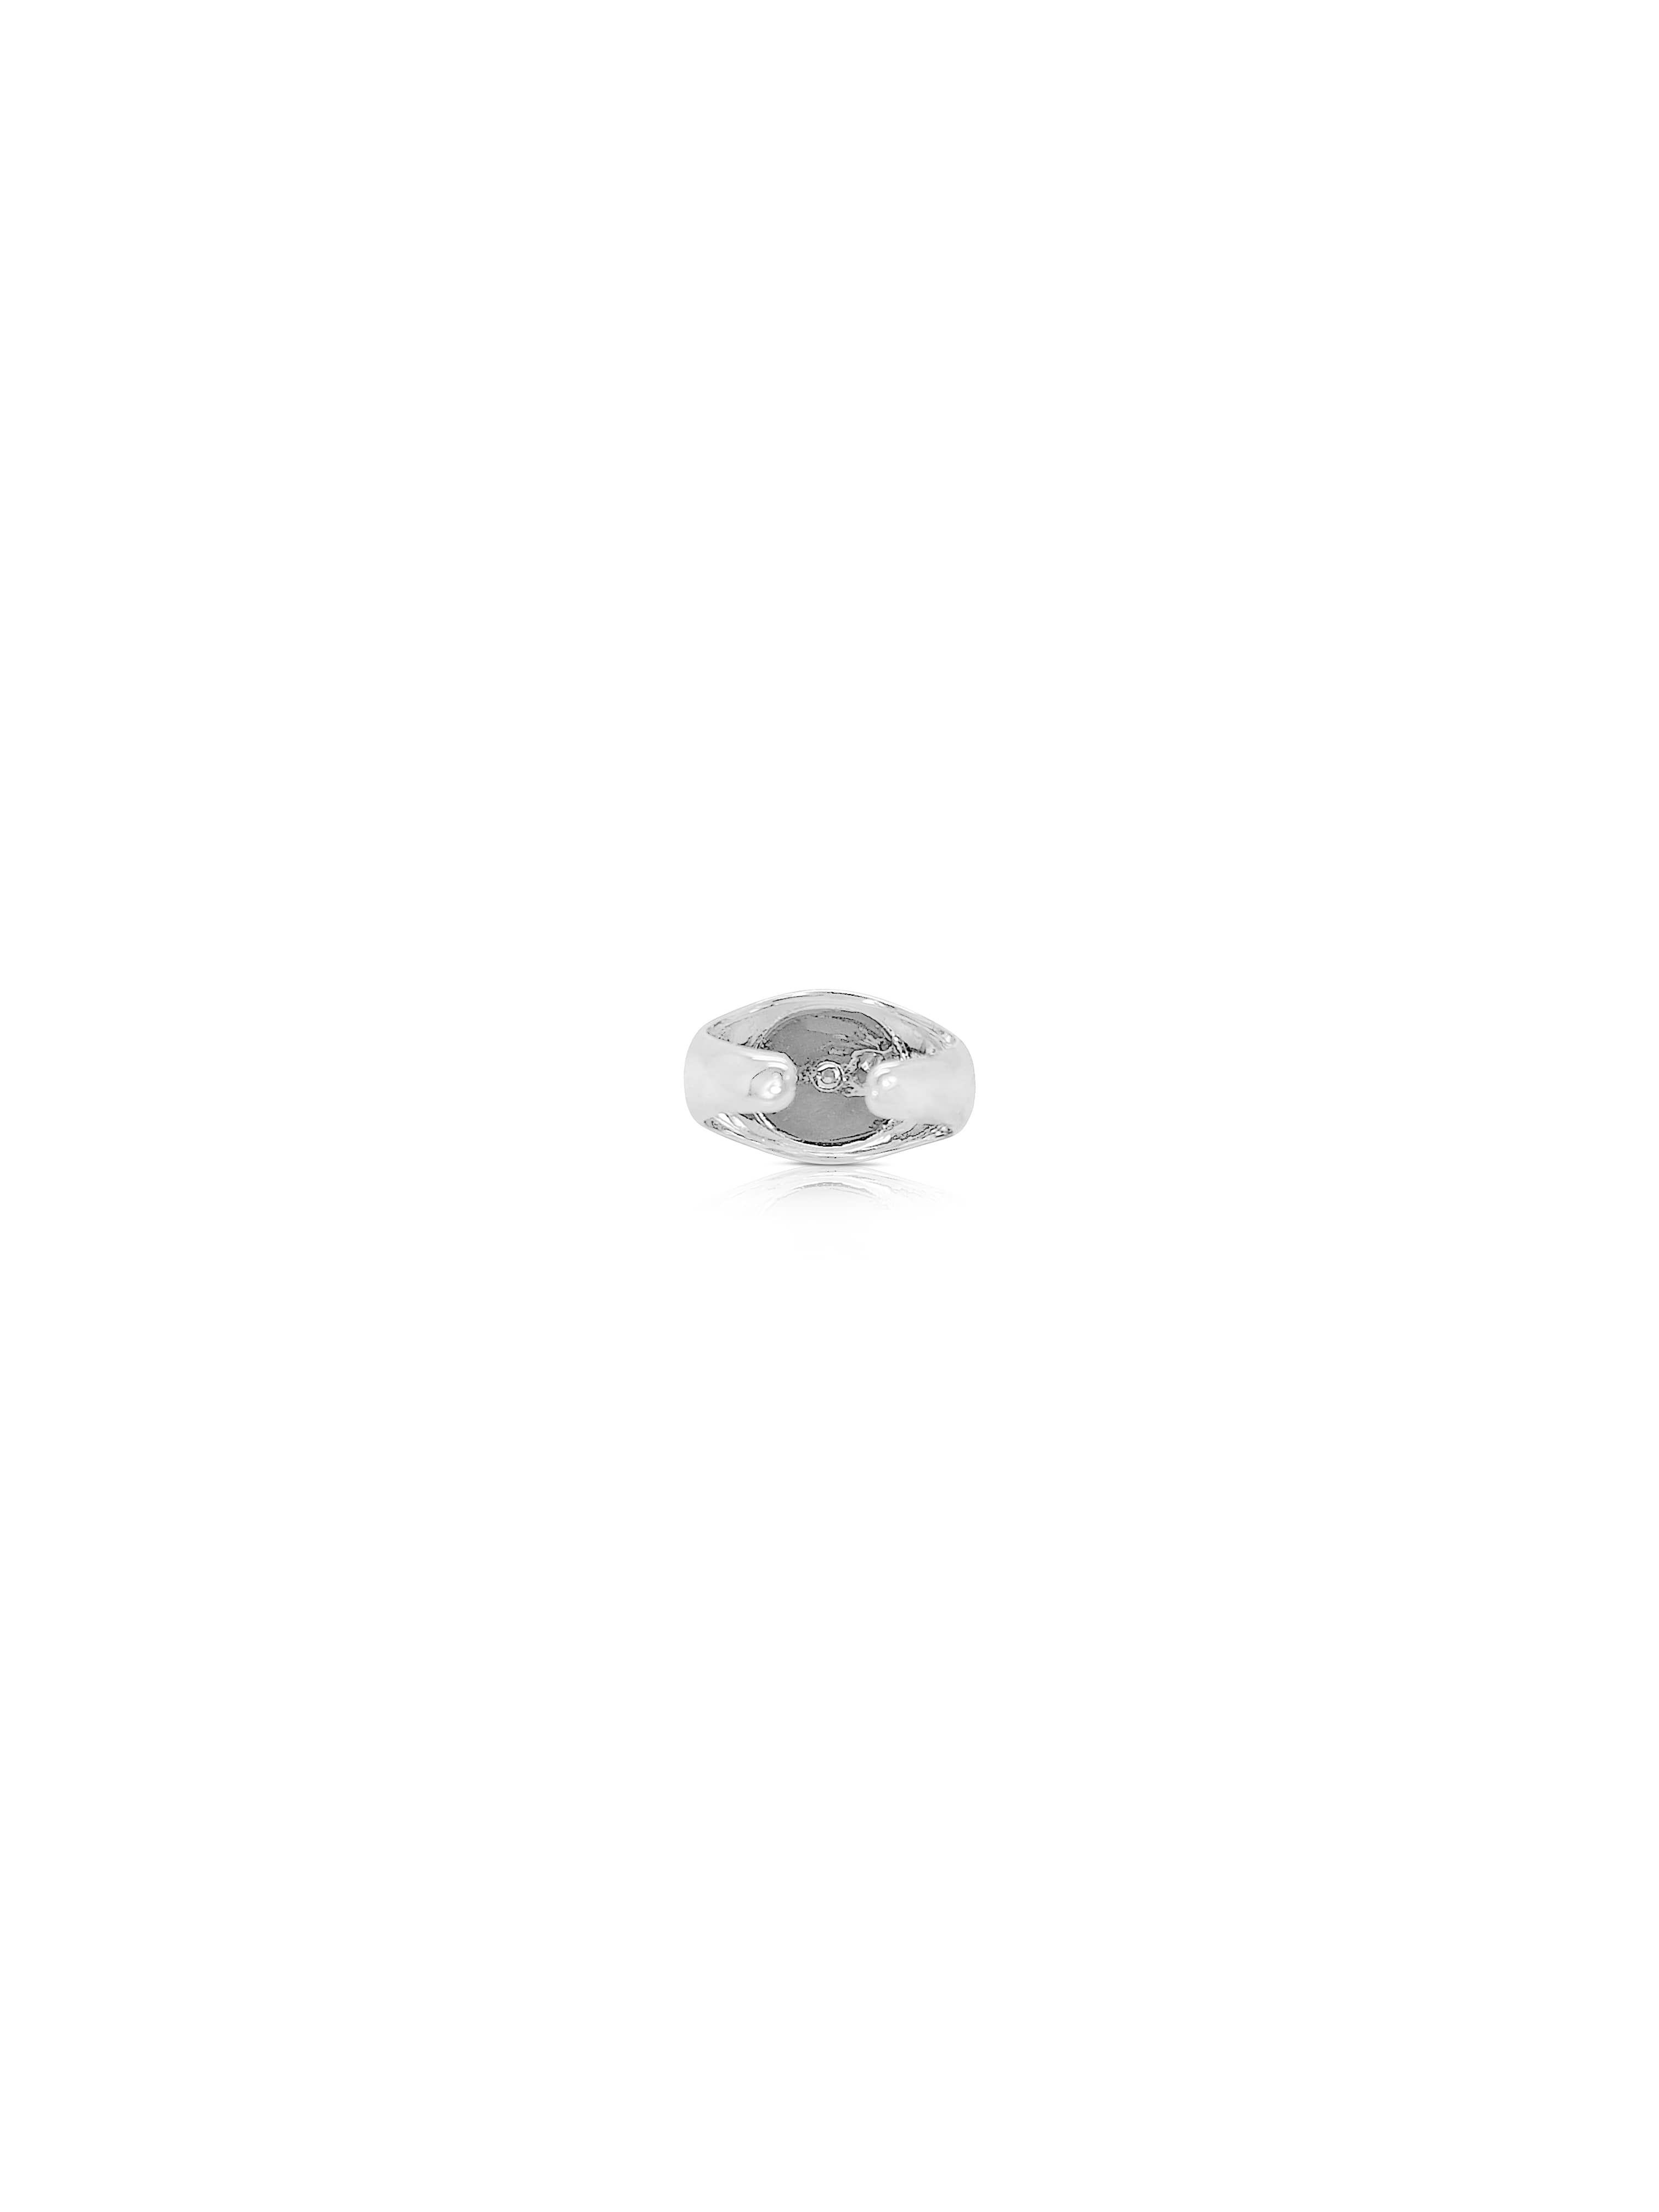 Silver Starry Signet Ring